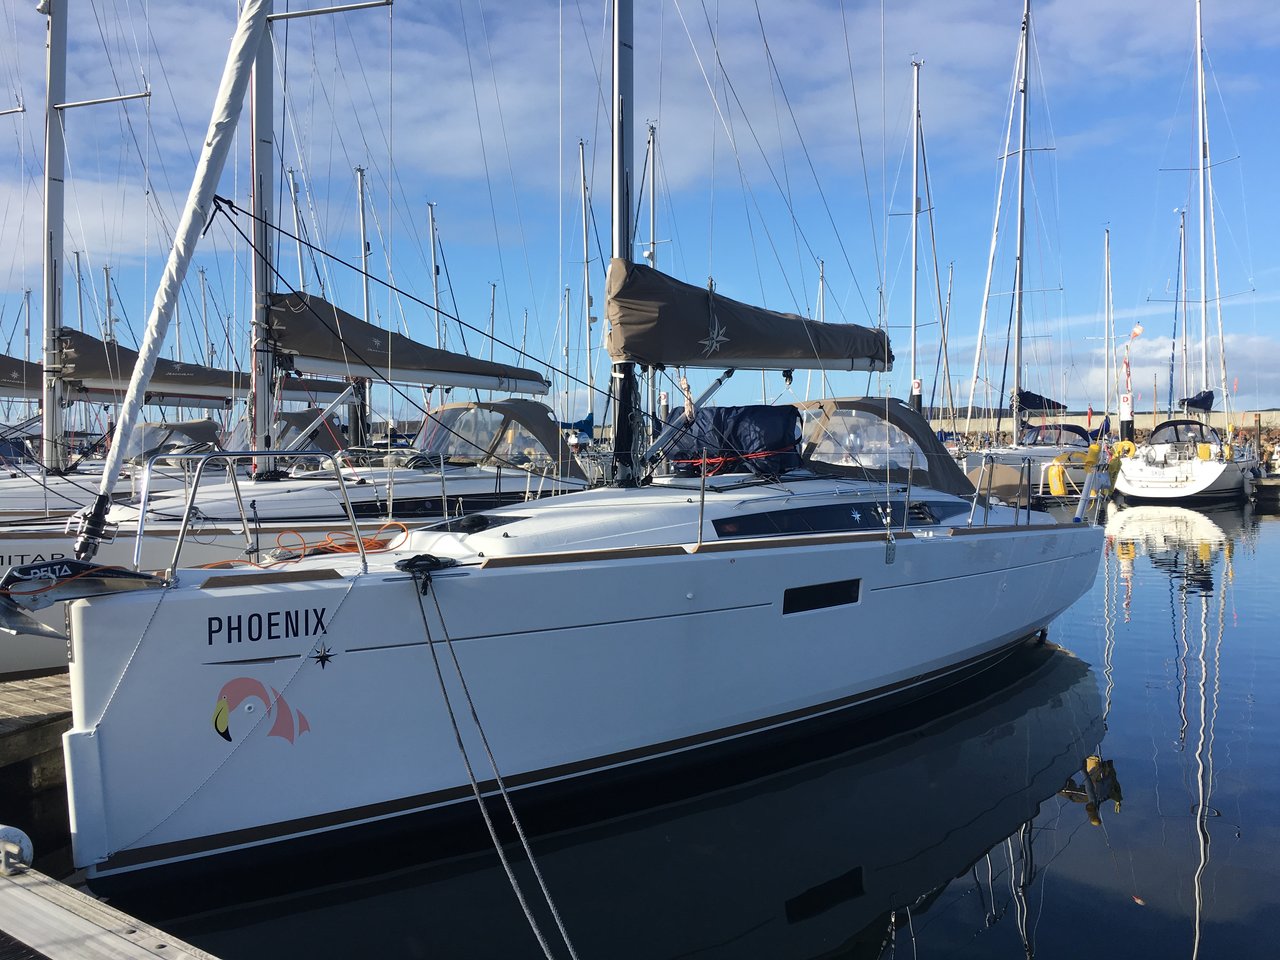 Sun Odyssey 349 - Yacht Charter Firth of Clyde & Boat hire in United Kingdom Scotland Firth of Clyde Largs Largs Yacht Haven 1